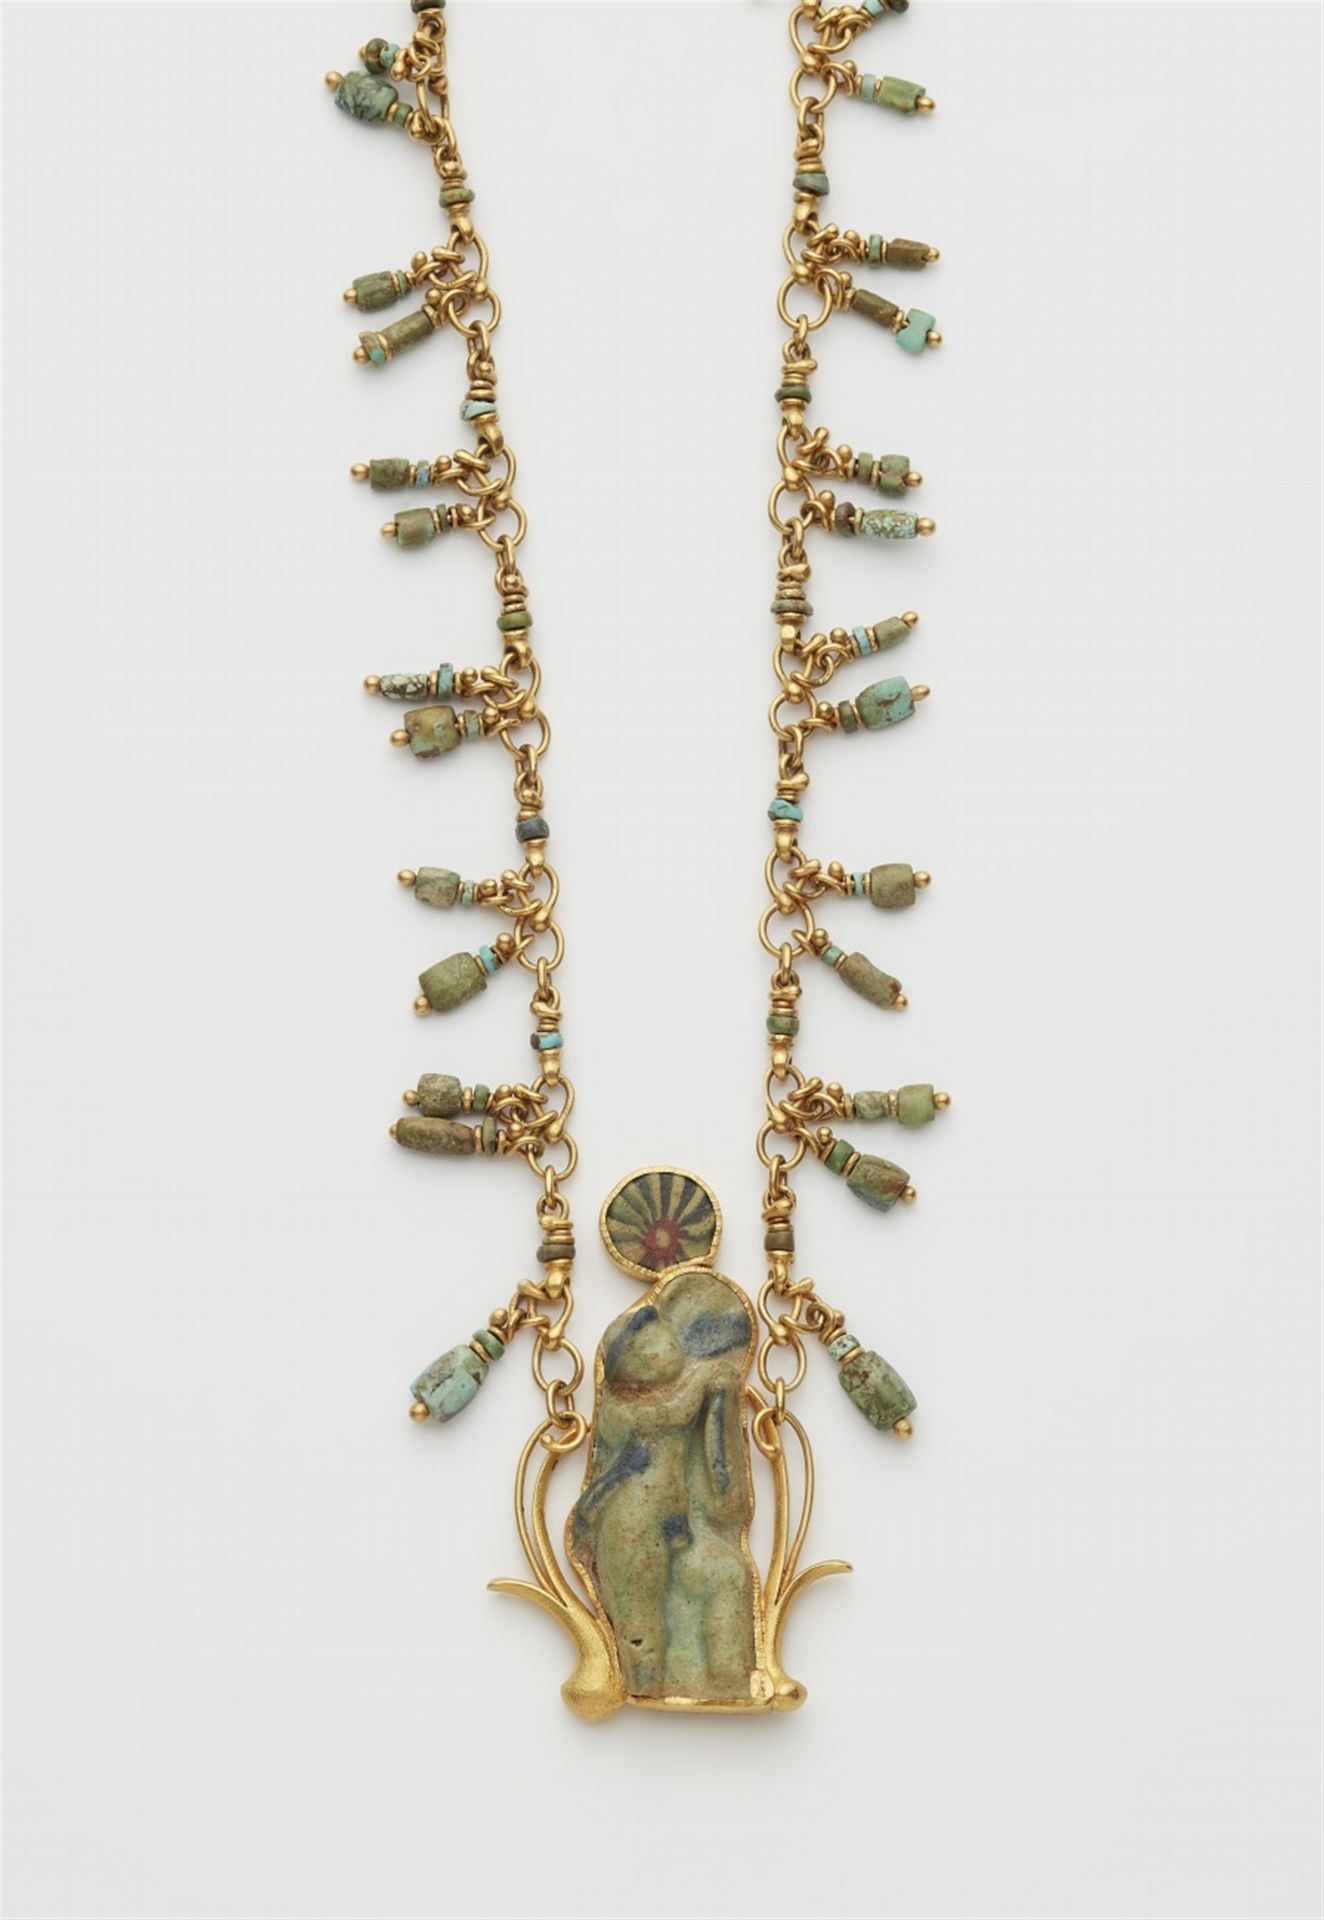 A 22k gold necklace with an ancient Roman relief fragment - Image 3 of 3